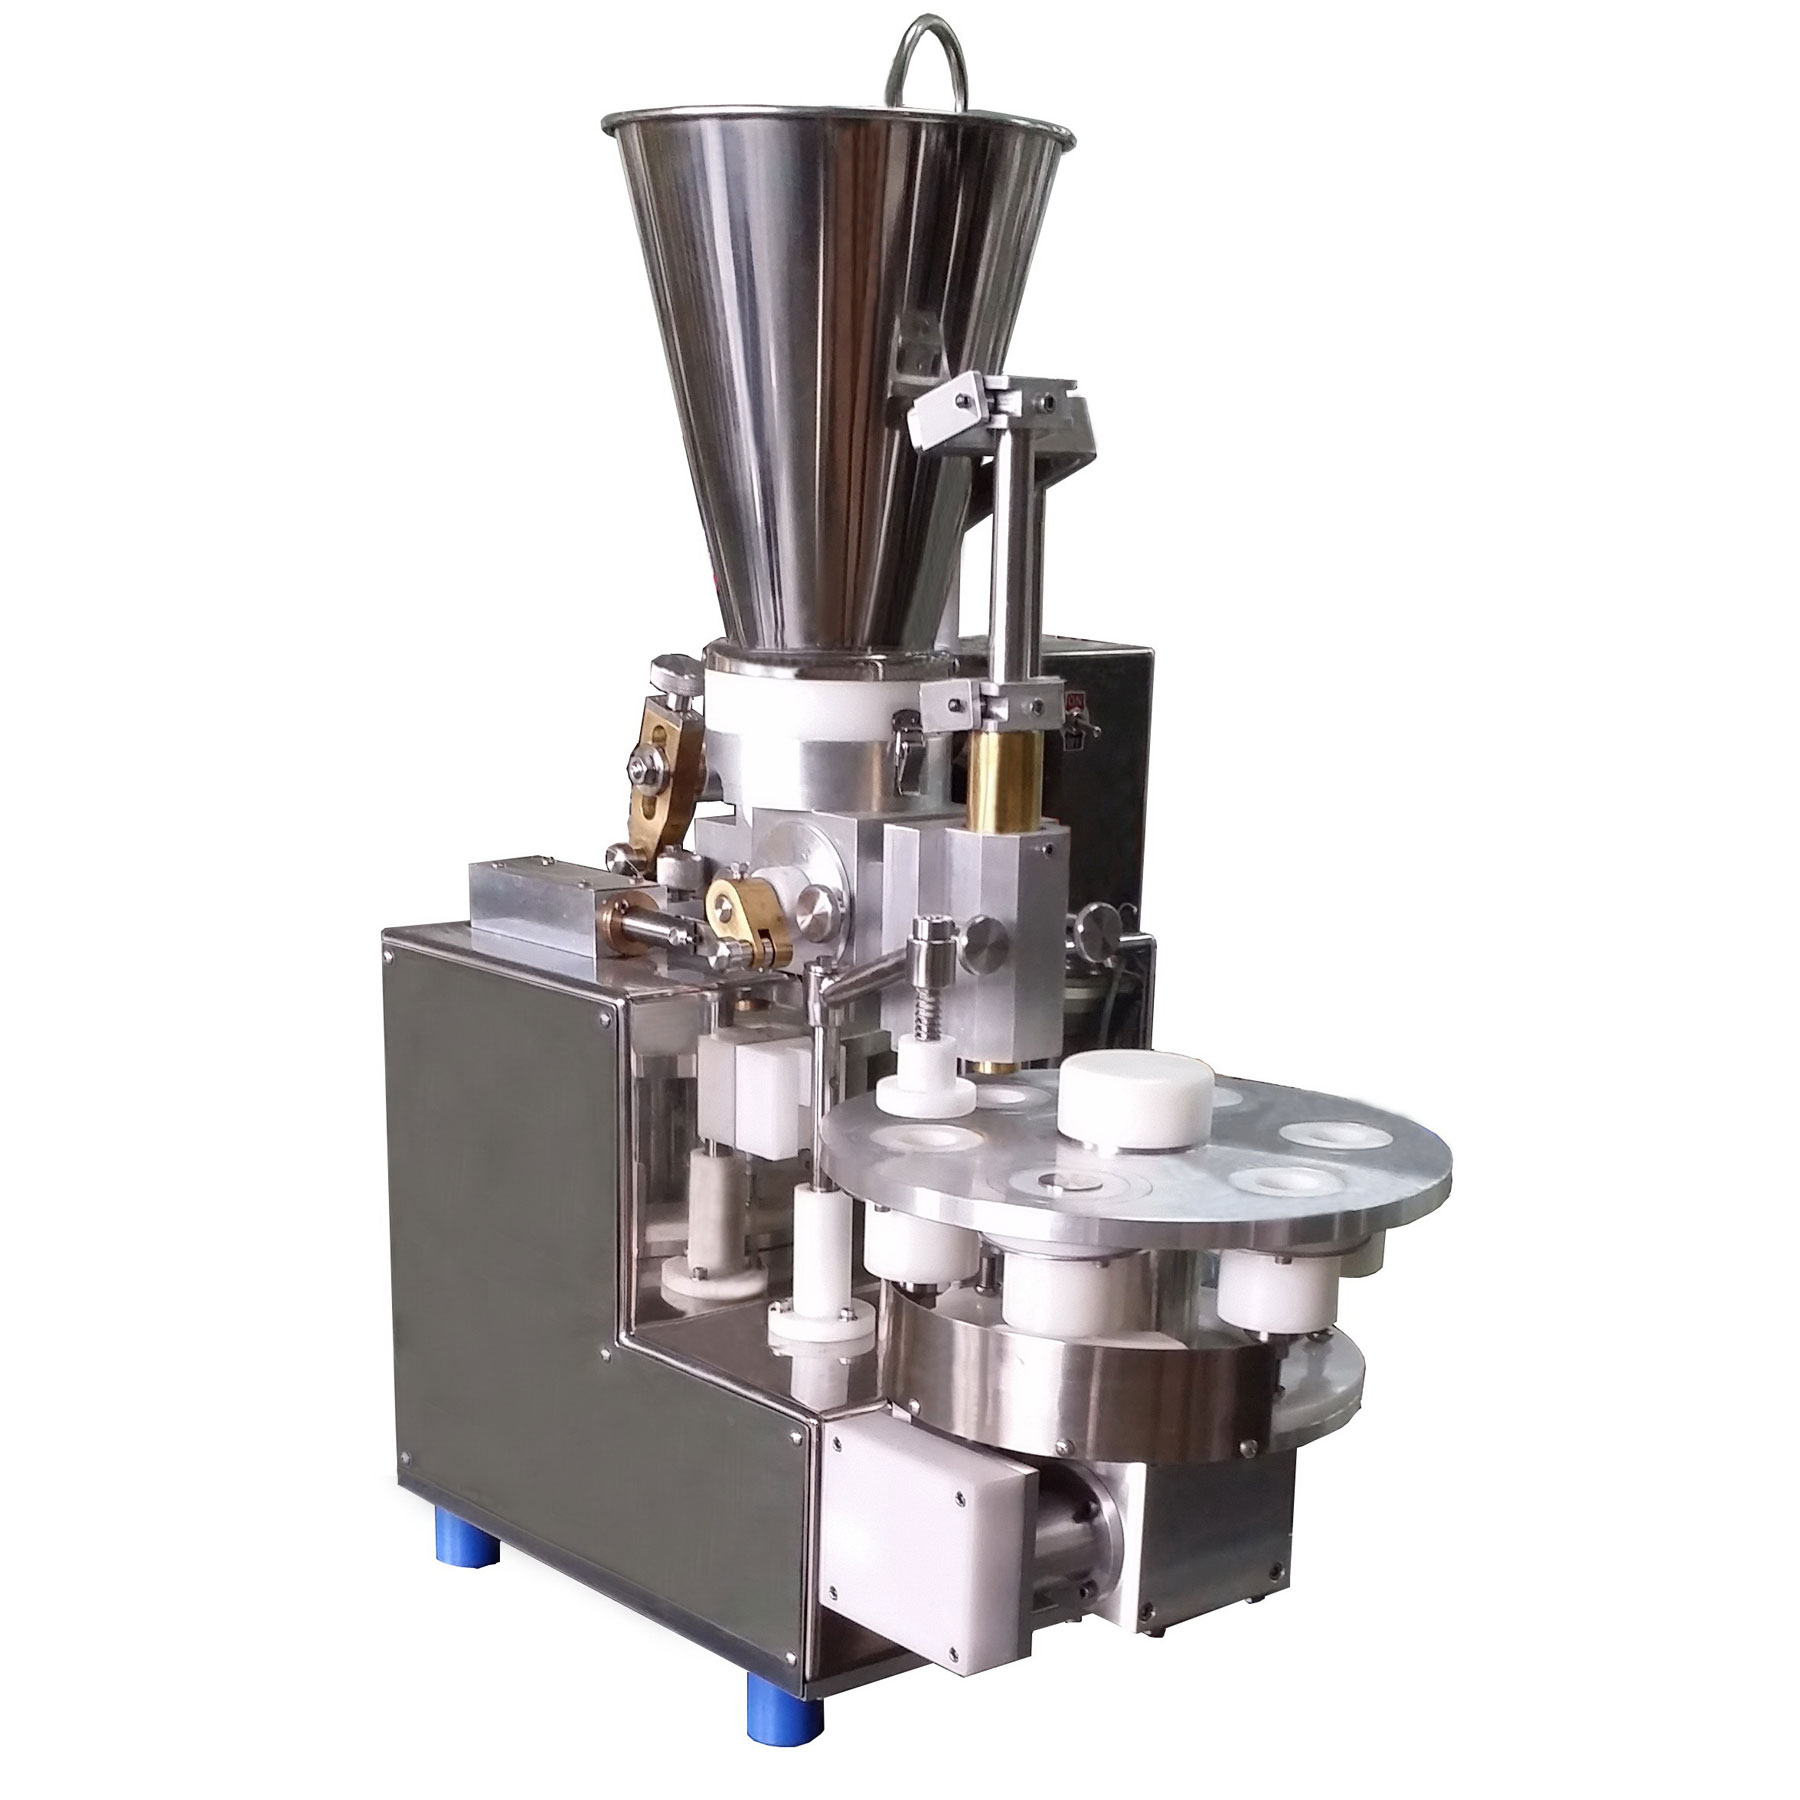 Semi automatic machine for the production of Shao-Mai,with lightweight and compact in design